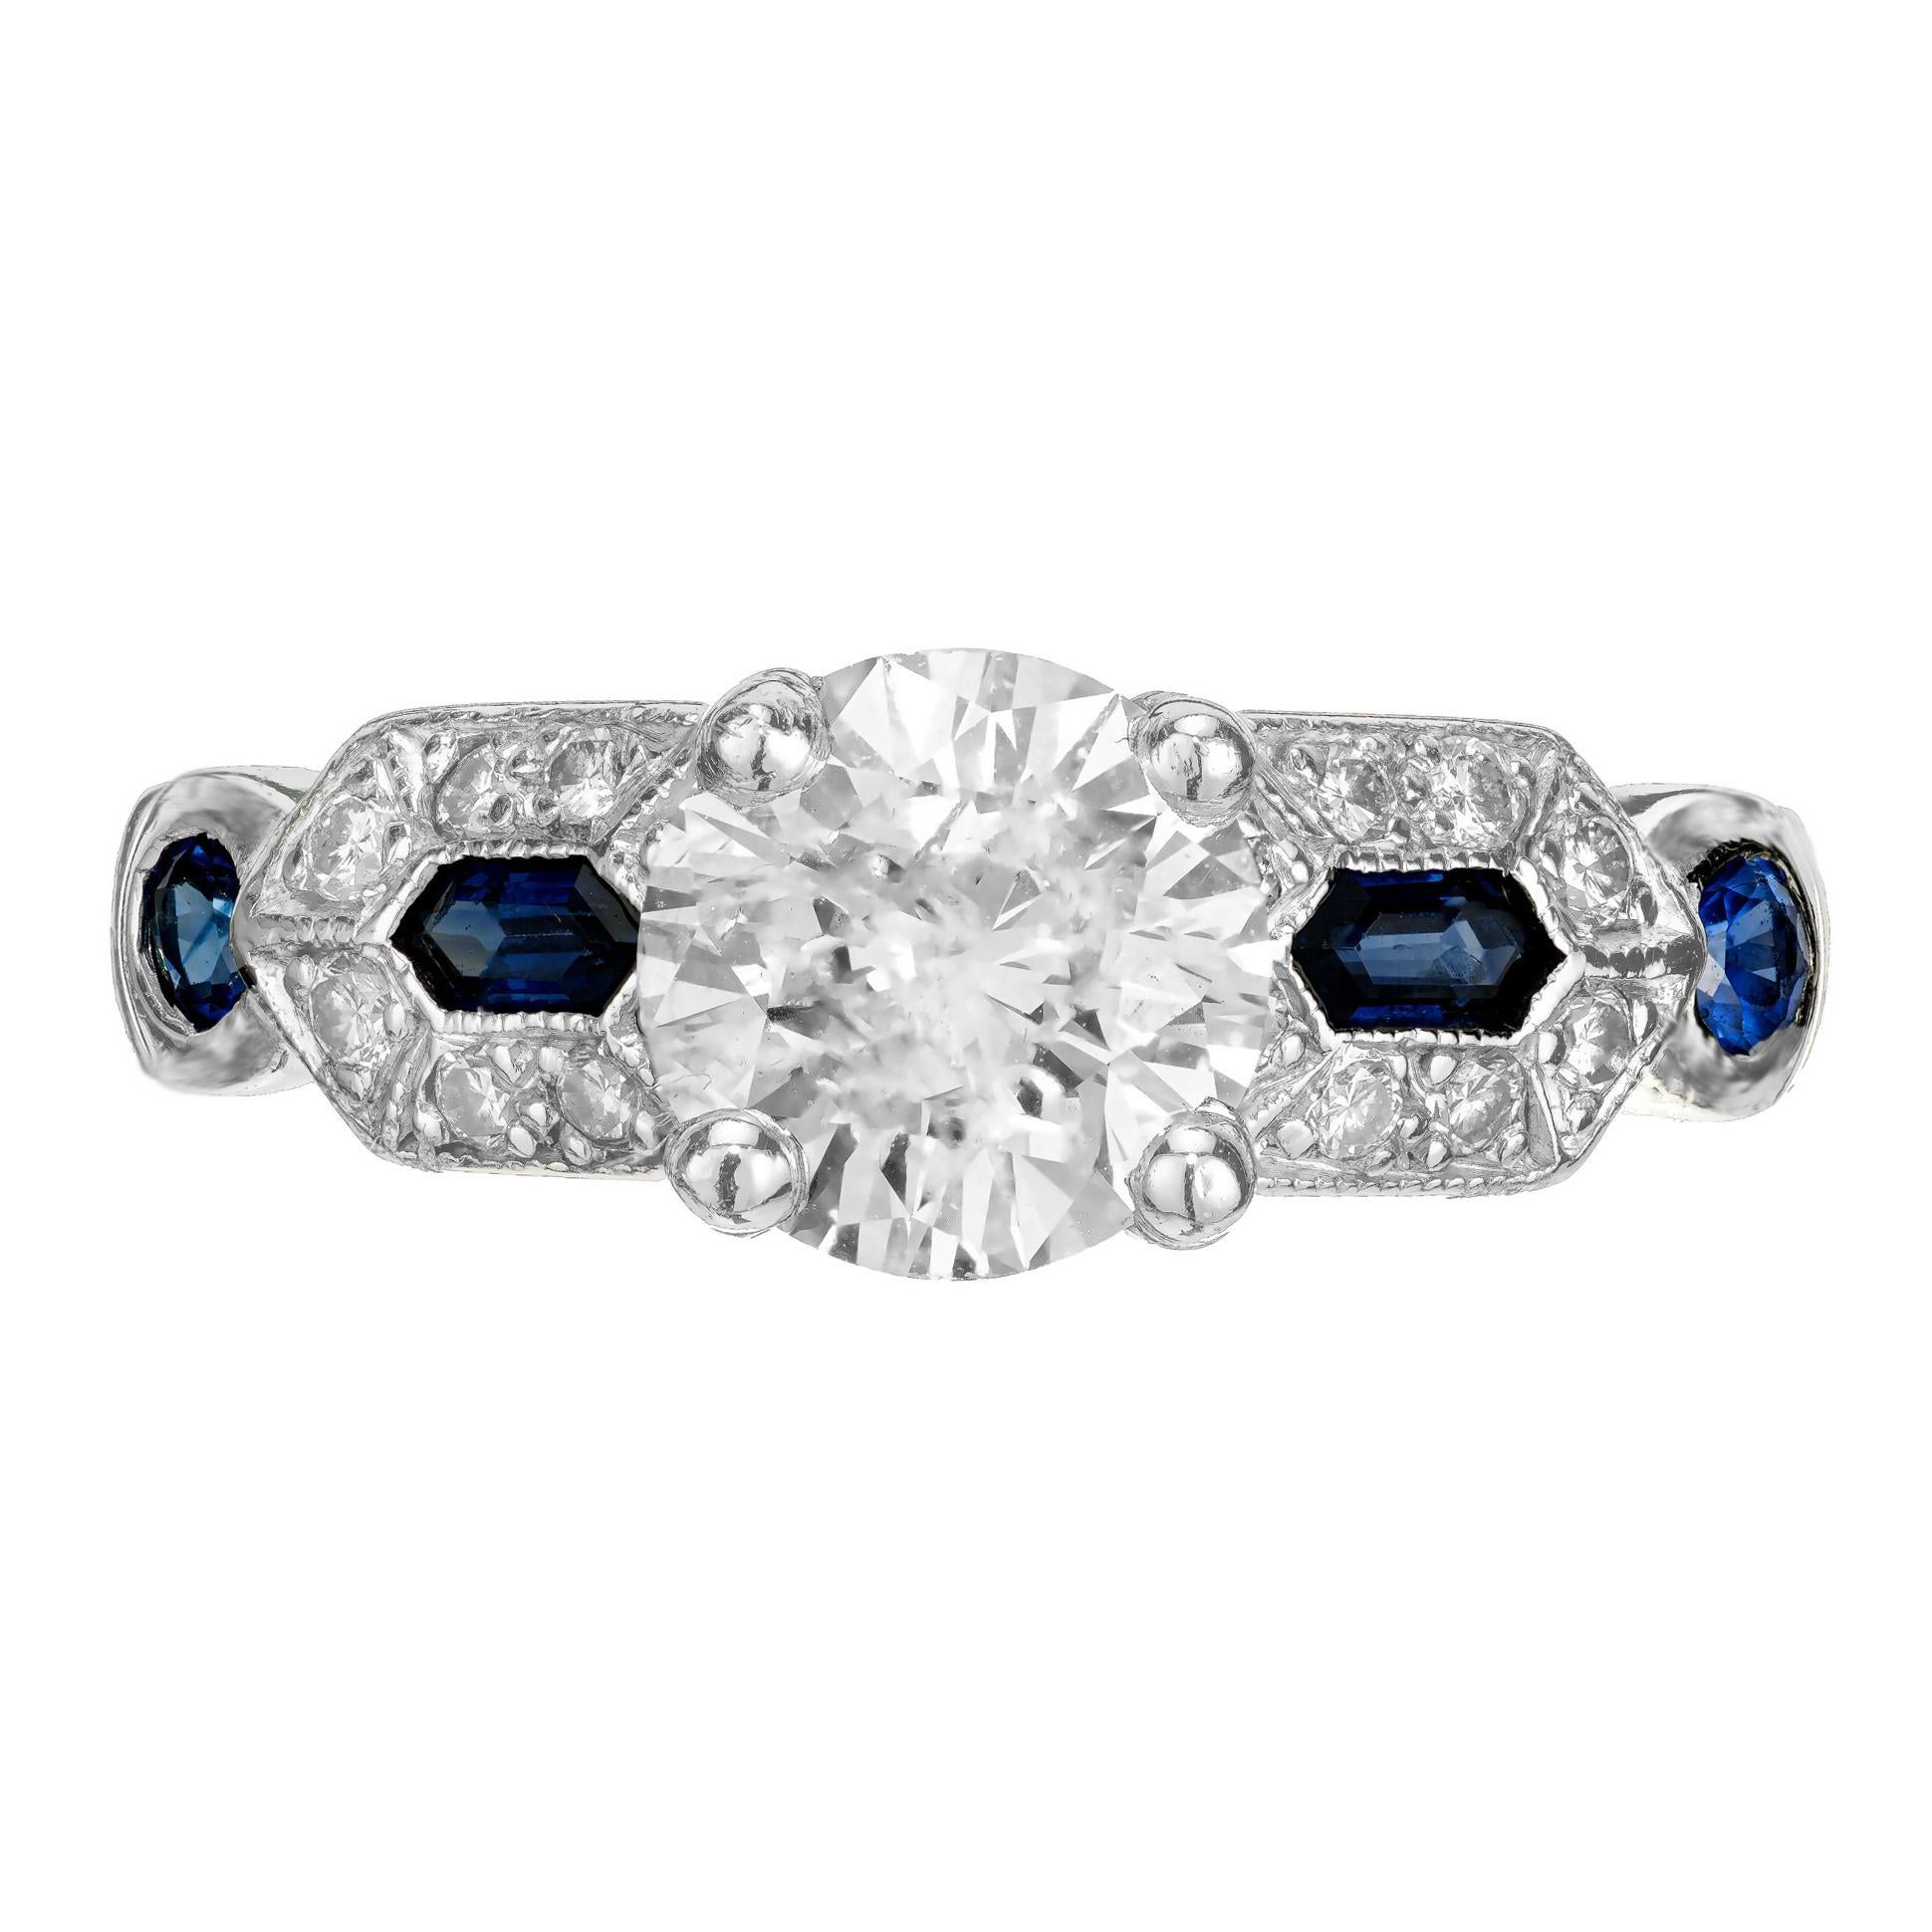 1940's Diamond platinum engagement ring. GIA certified round ideal cut center diamond in a platinum setting with two sapphires with round diamond halos and two round cut bezel set sapphire accents.  

1 Round Ideal cut diamond, approx. total weight